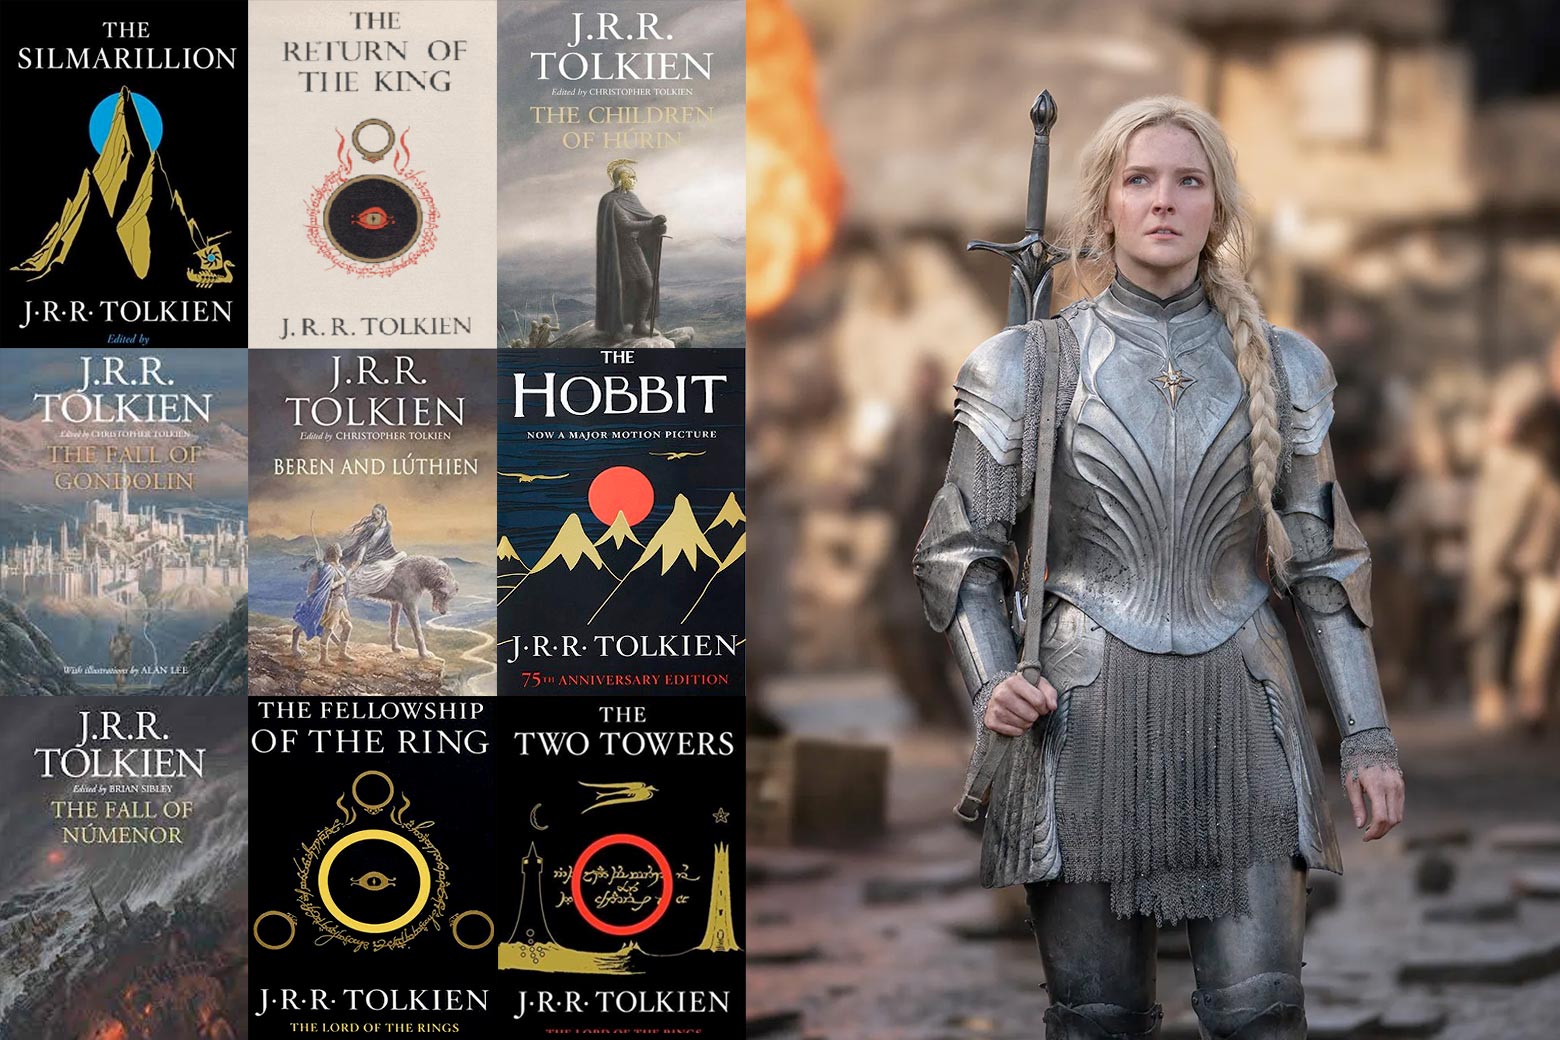 On the left, the covers of nine (nine!) different Tolkien Lord of the Rings books, from the original LOTR trilogy of The Fellowship of the Ring and The Two Towers and The Return of the King to The Silmarillion to The Fall of Numenor, Beren and Luthien, The Fall of Gondolin, and the Children of Nurin. On the right, Morfydd Clark, her hair long and blonde, her body covered in a suit of armor, in The Rings of Power.